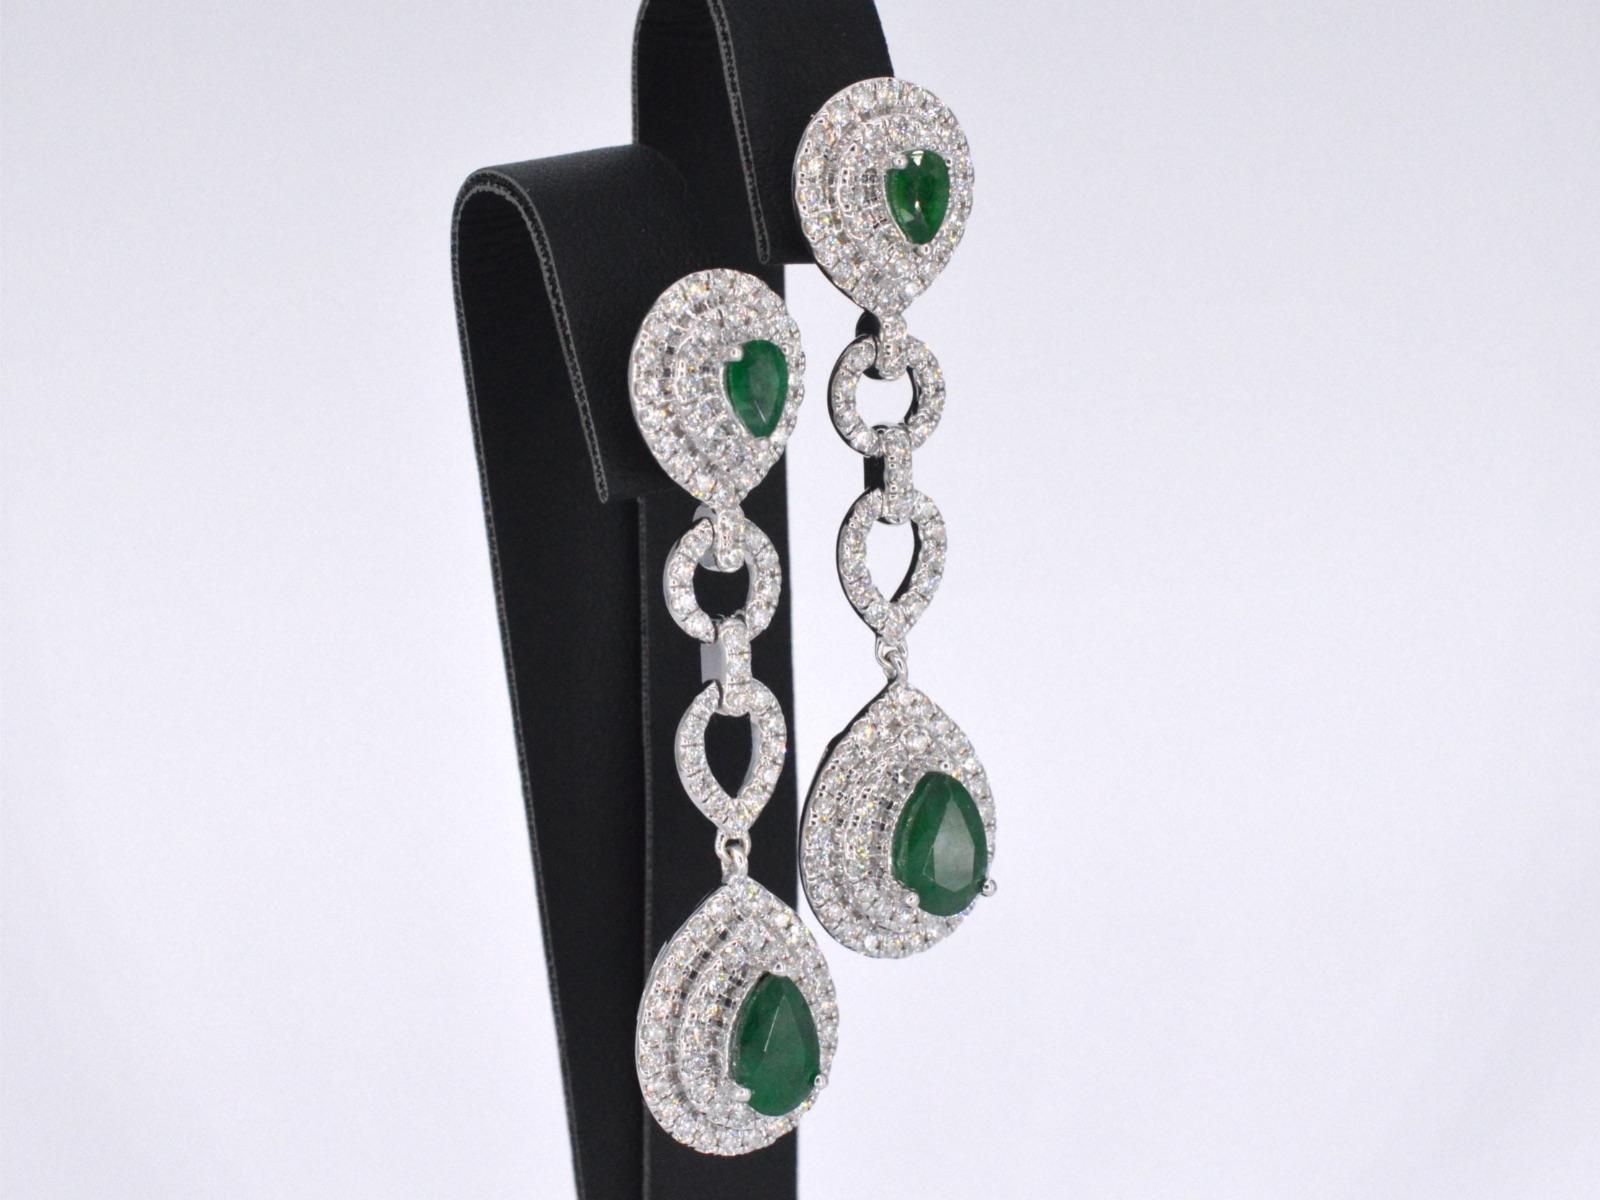 Brilliant Cut White gold earrings with diamonds and emeralds